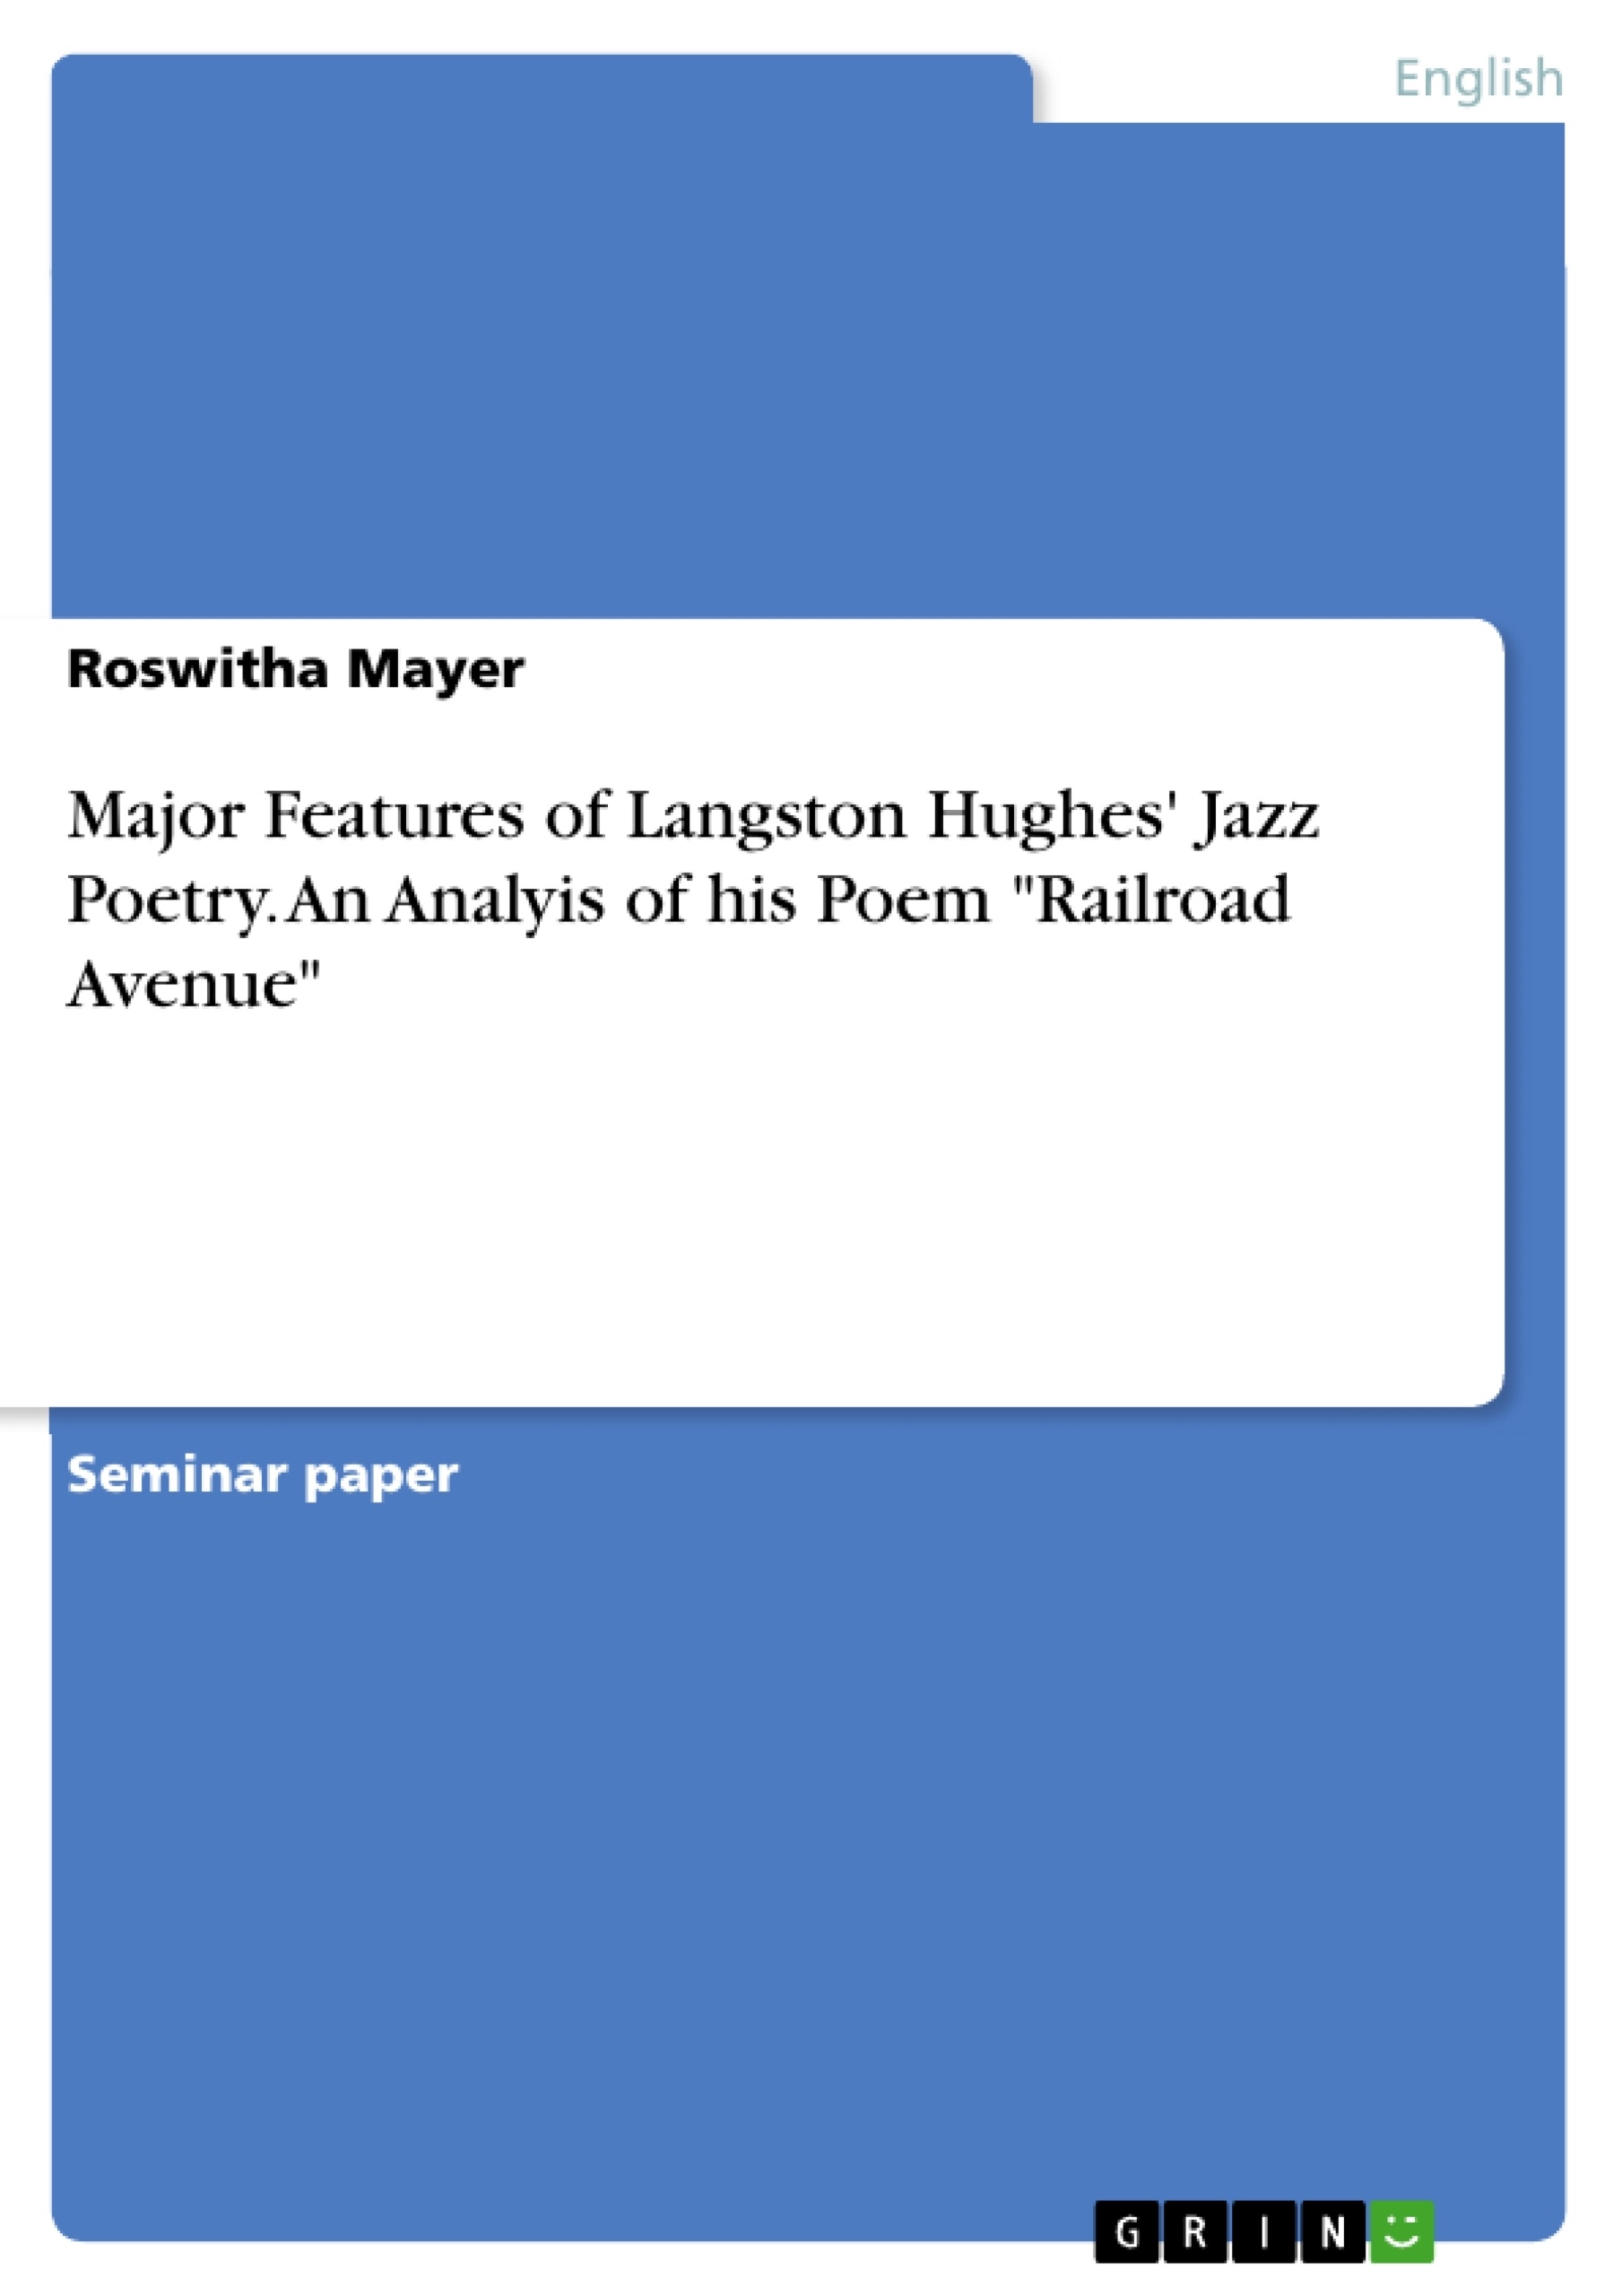 Title: Major Features of Langston Hughes' Jazz Poetry. An Analyis of his Poem "Railroad Avenue"